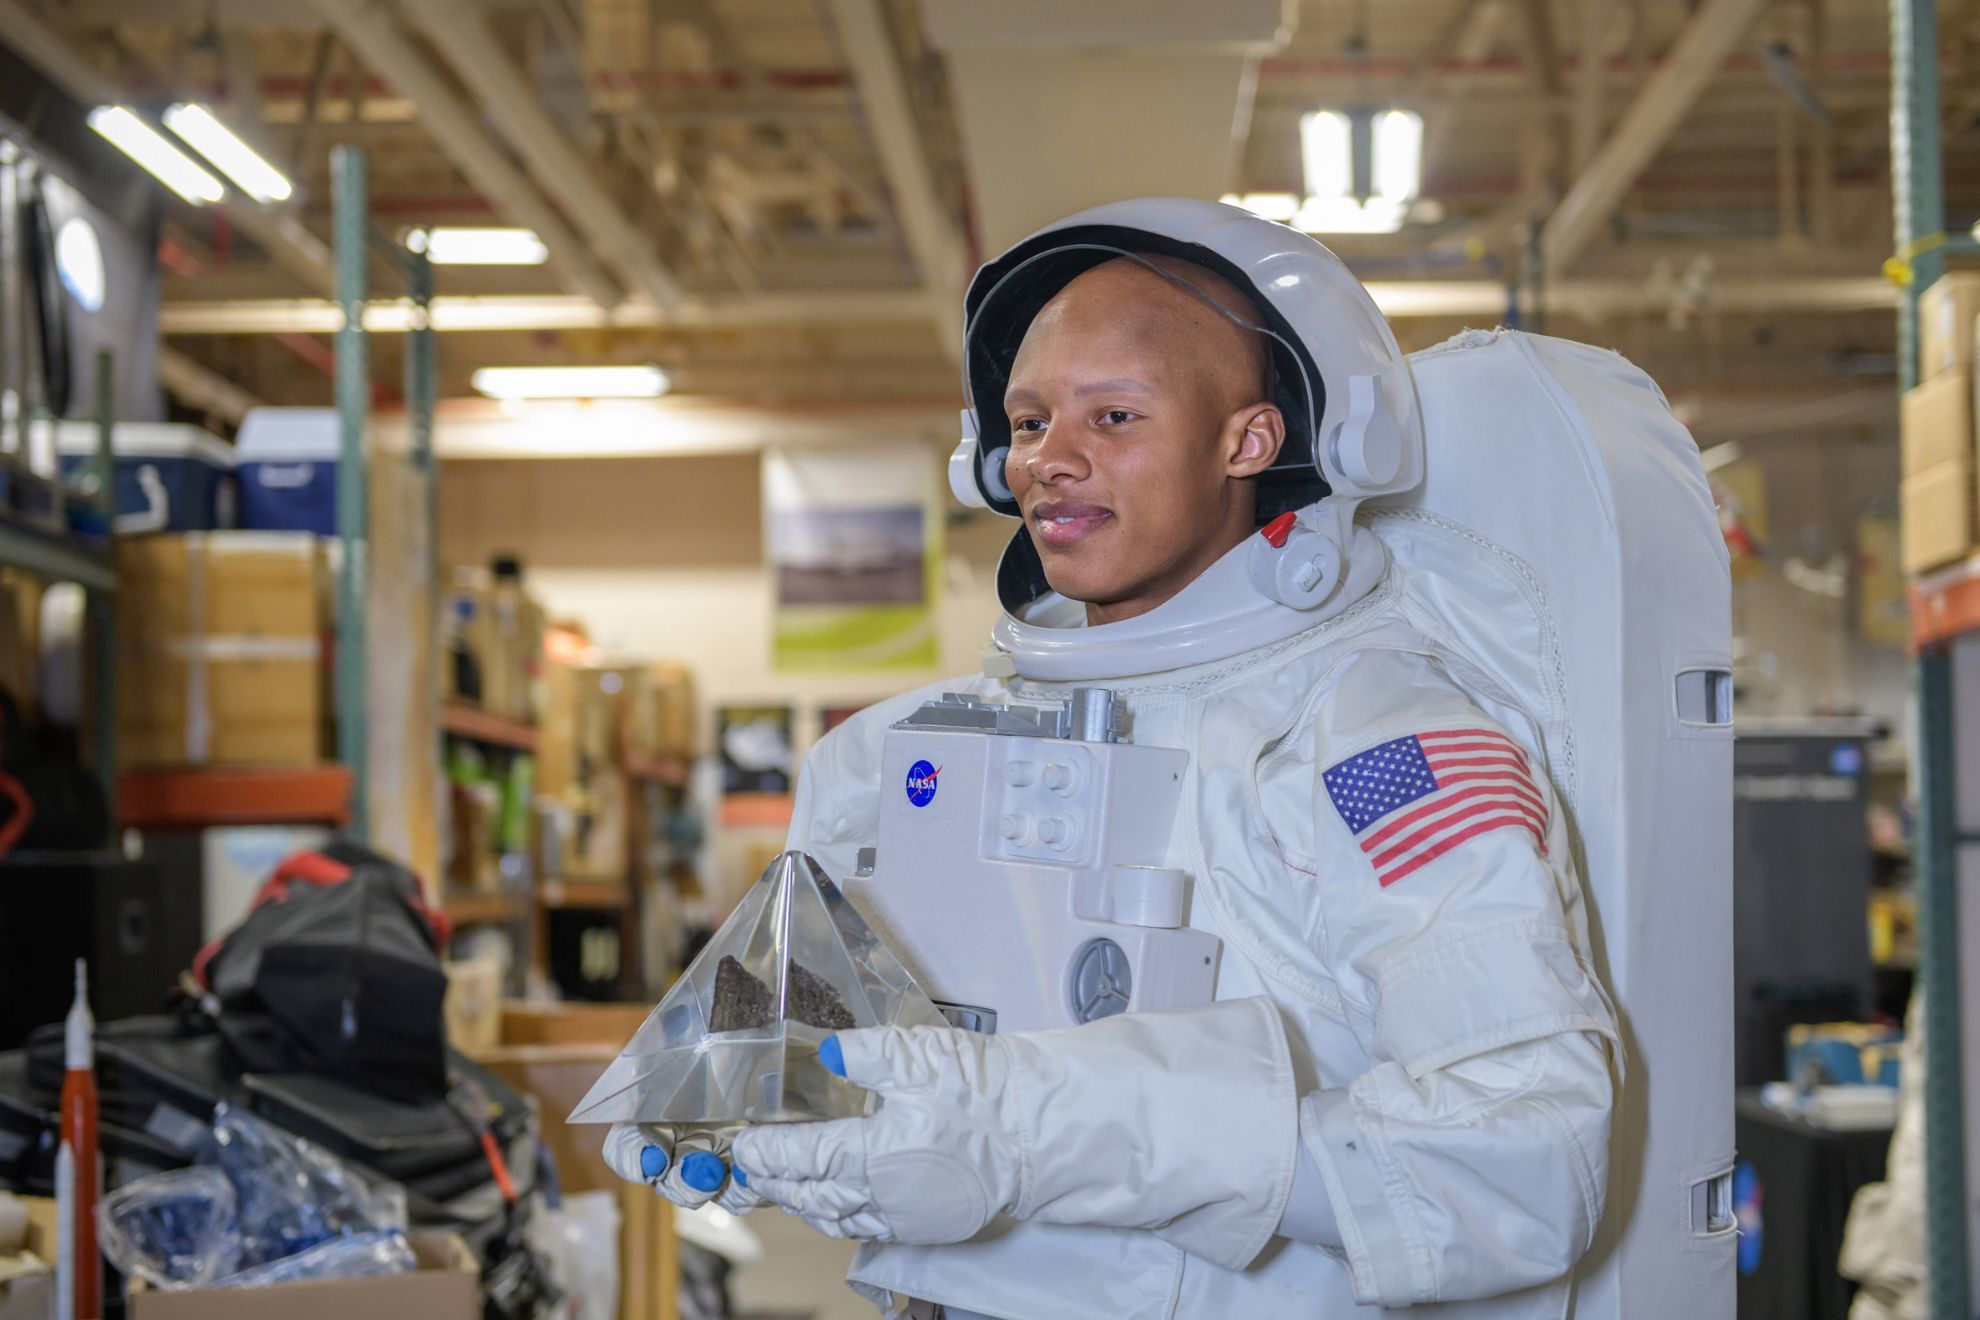 Josh Dobbs receives NASAs seal of approval and a perfect new nickname